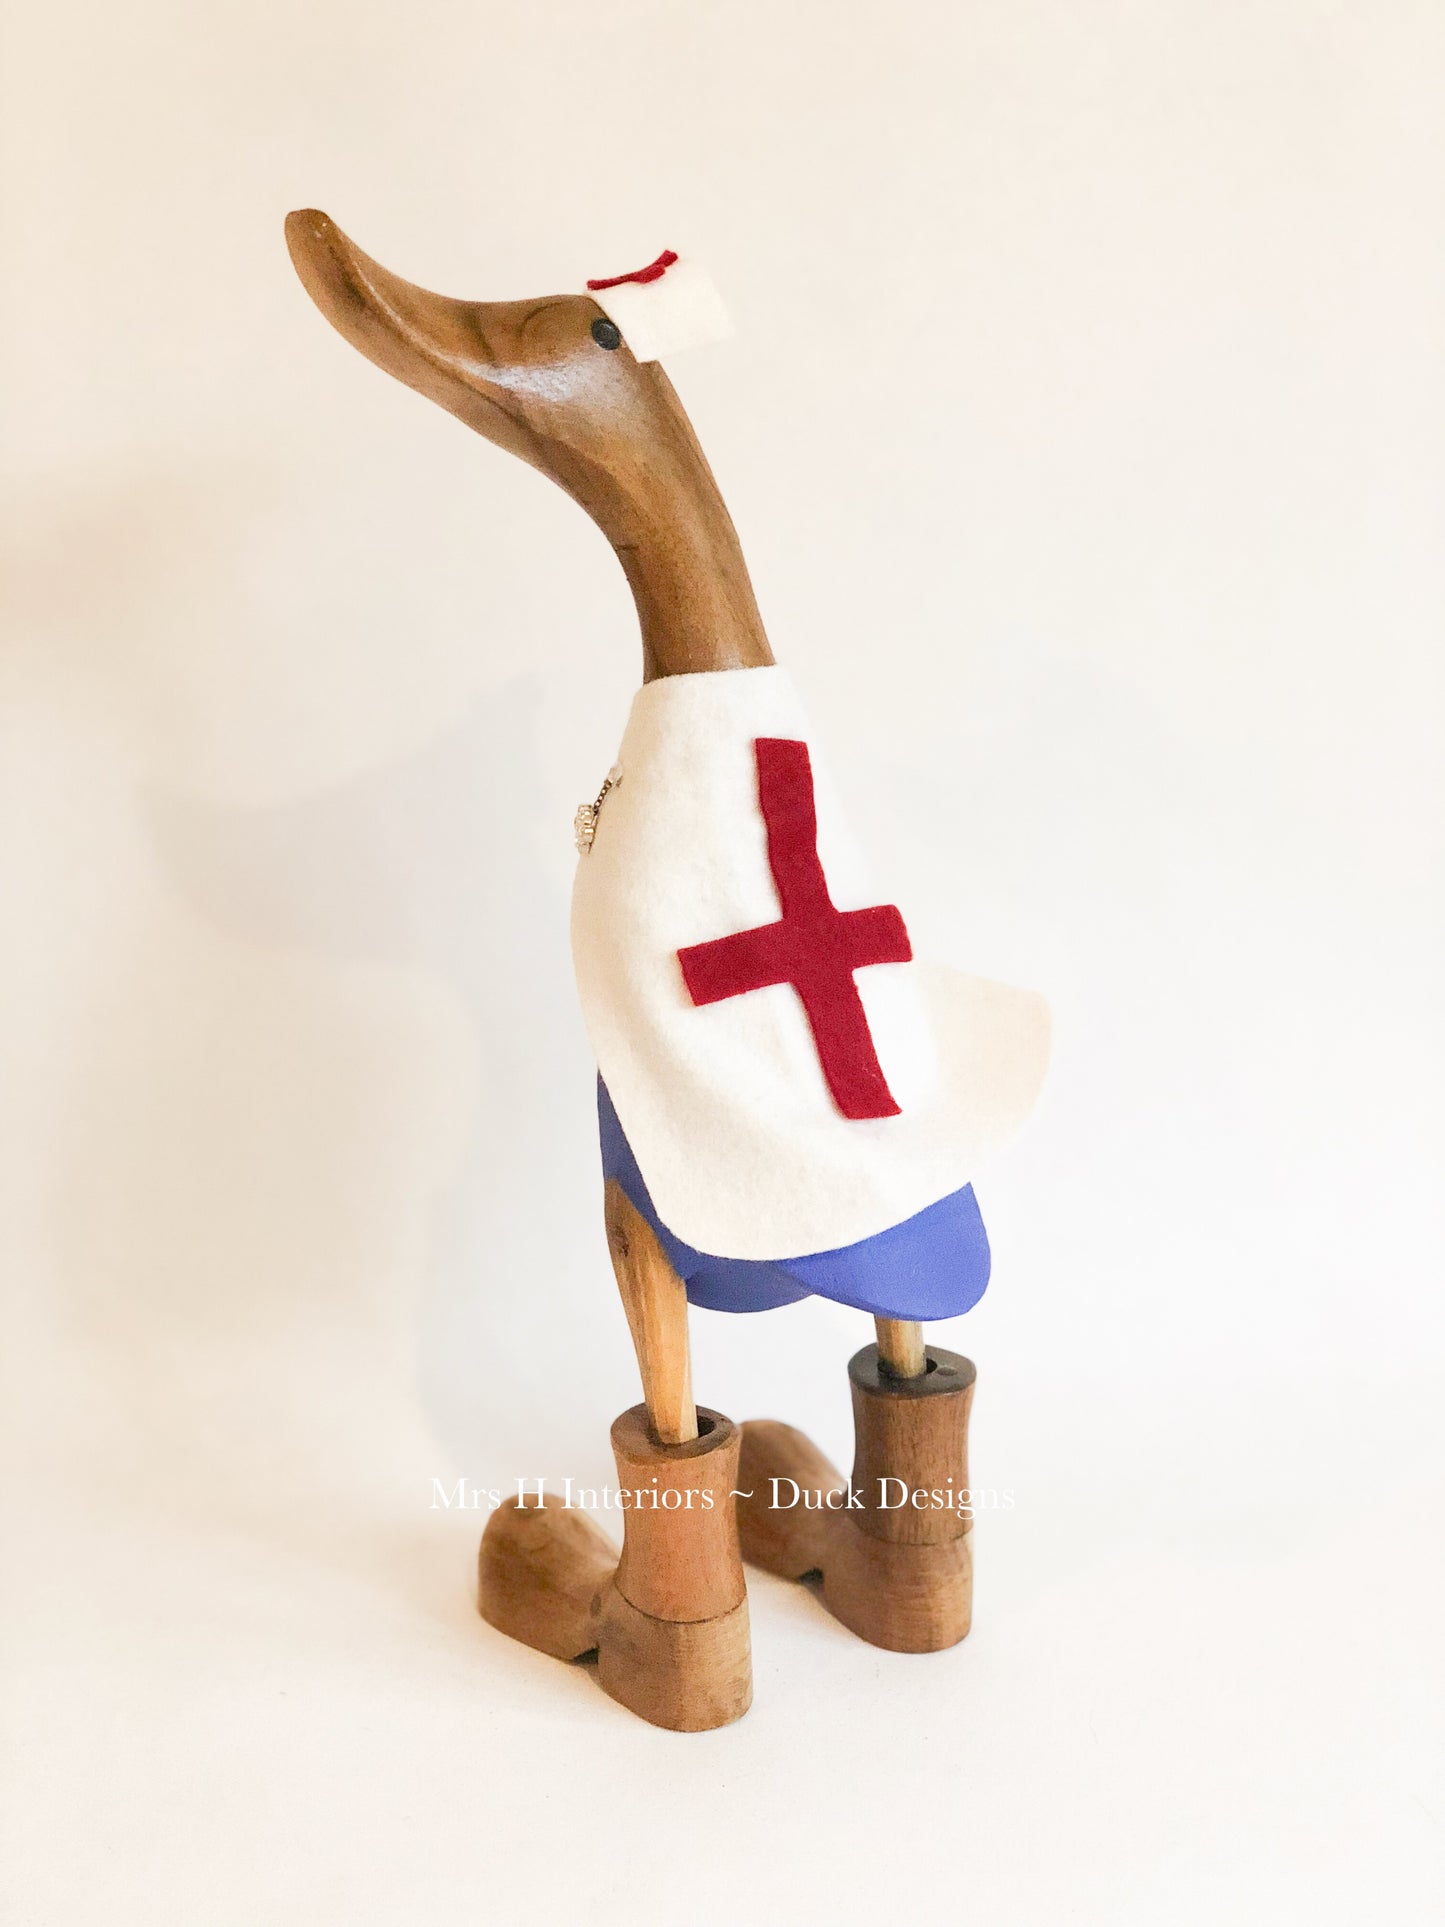 Ninny the vintage nurse - Decorated Wooden Duck in Boots by Mrs H the Duck Lady